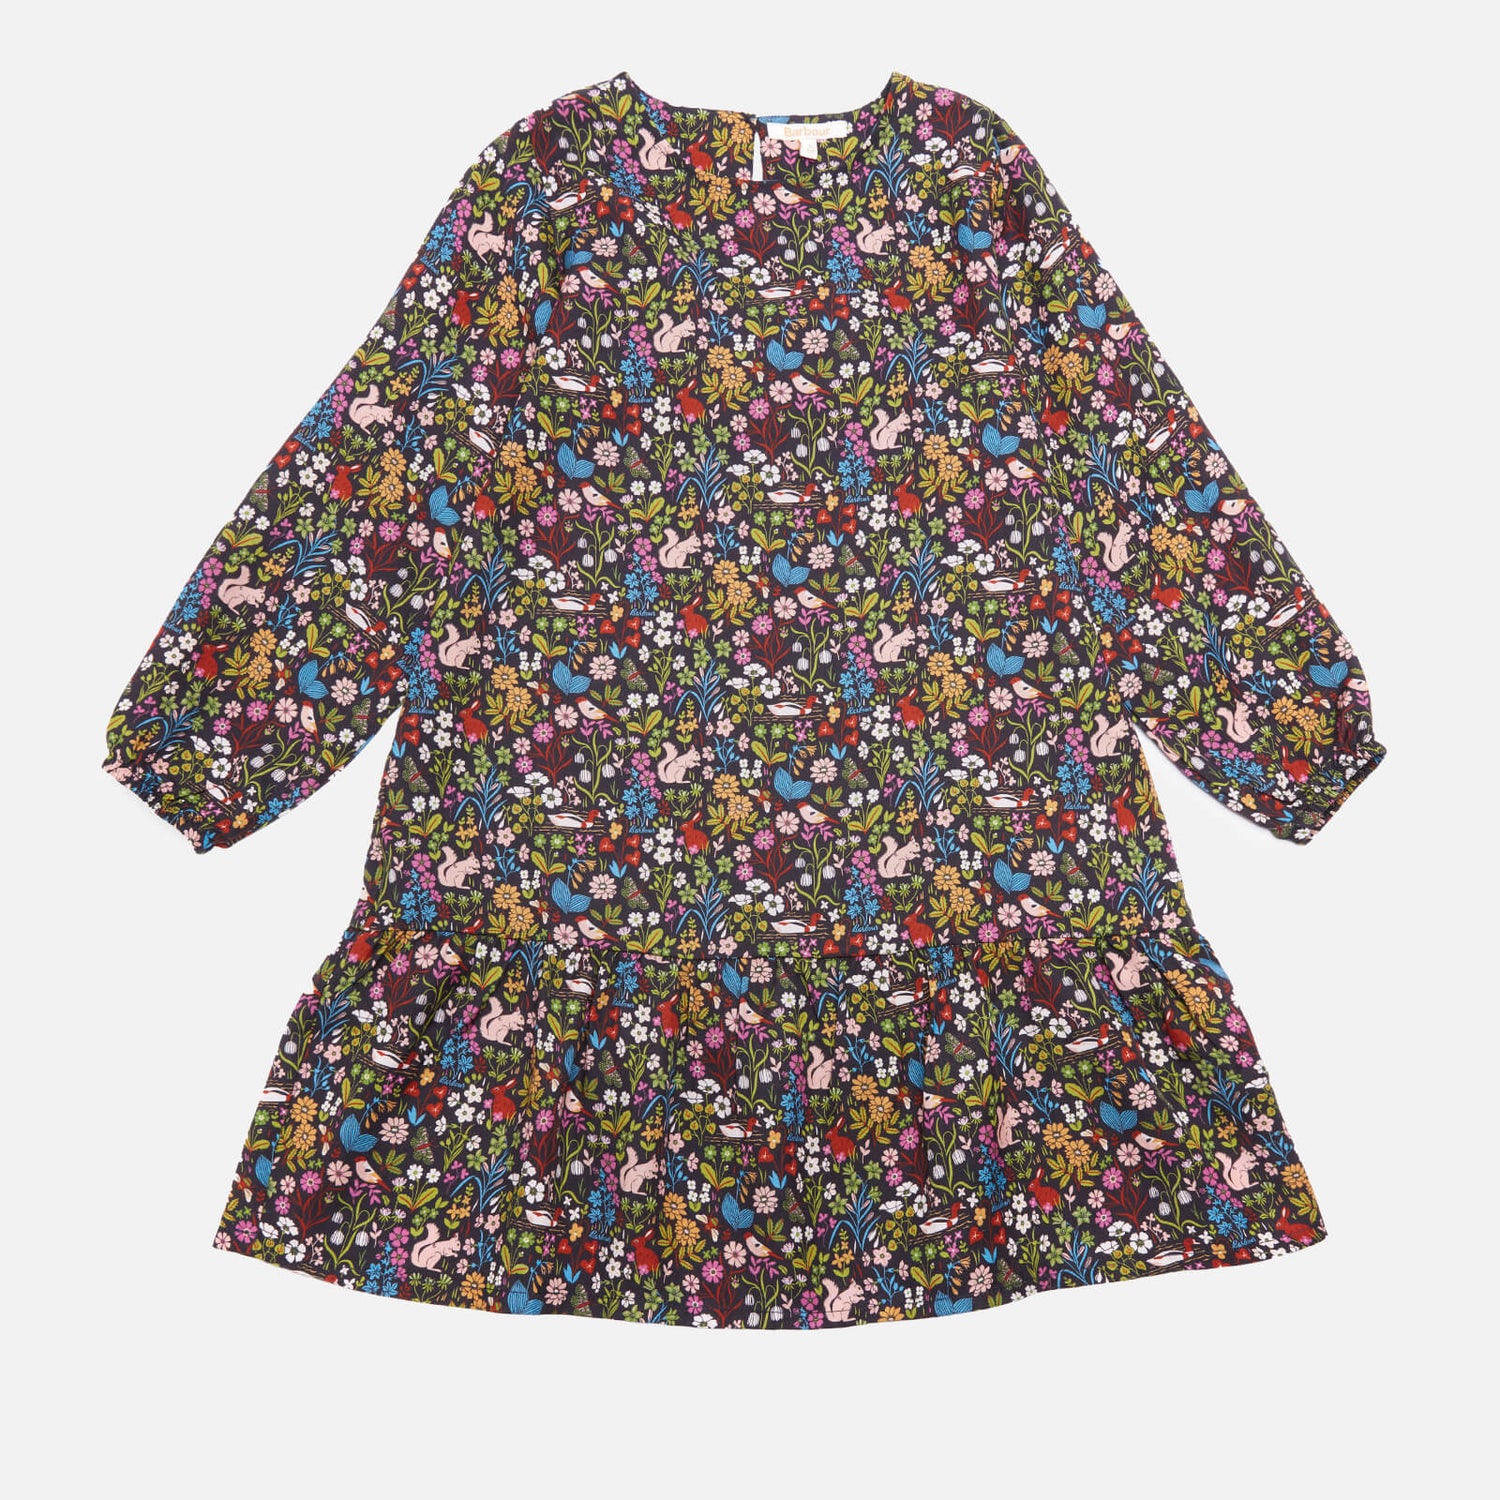 Barbour Girls' Amelie Dress - Multi - XL (12-13 Years)